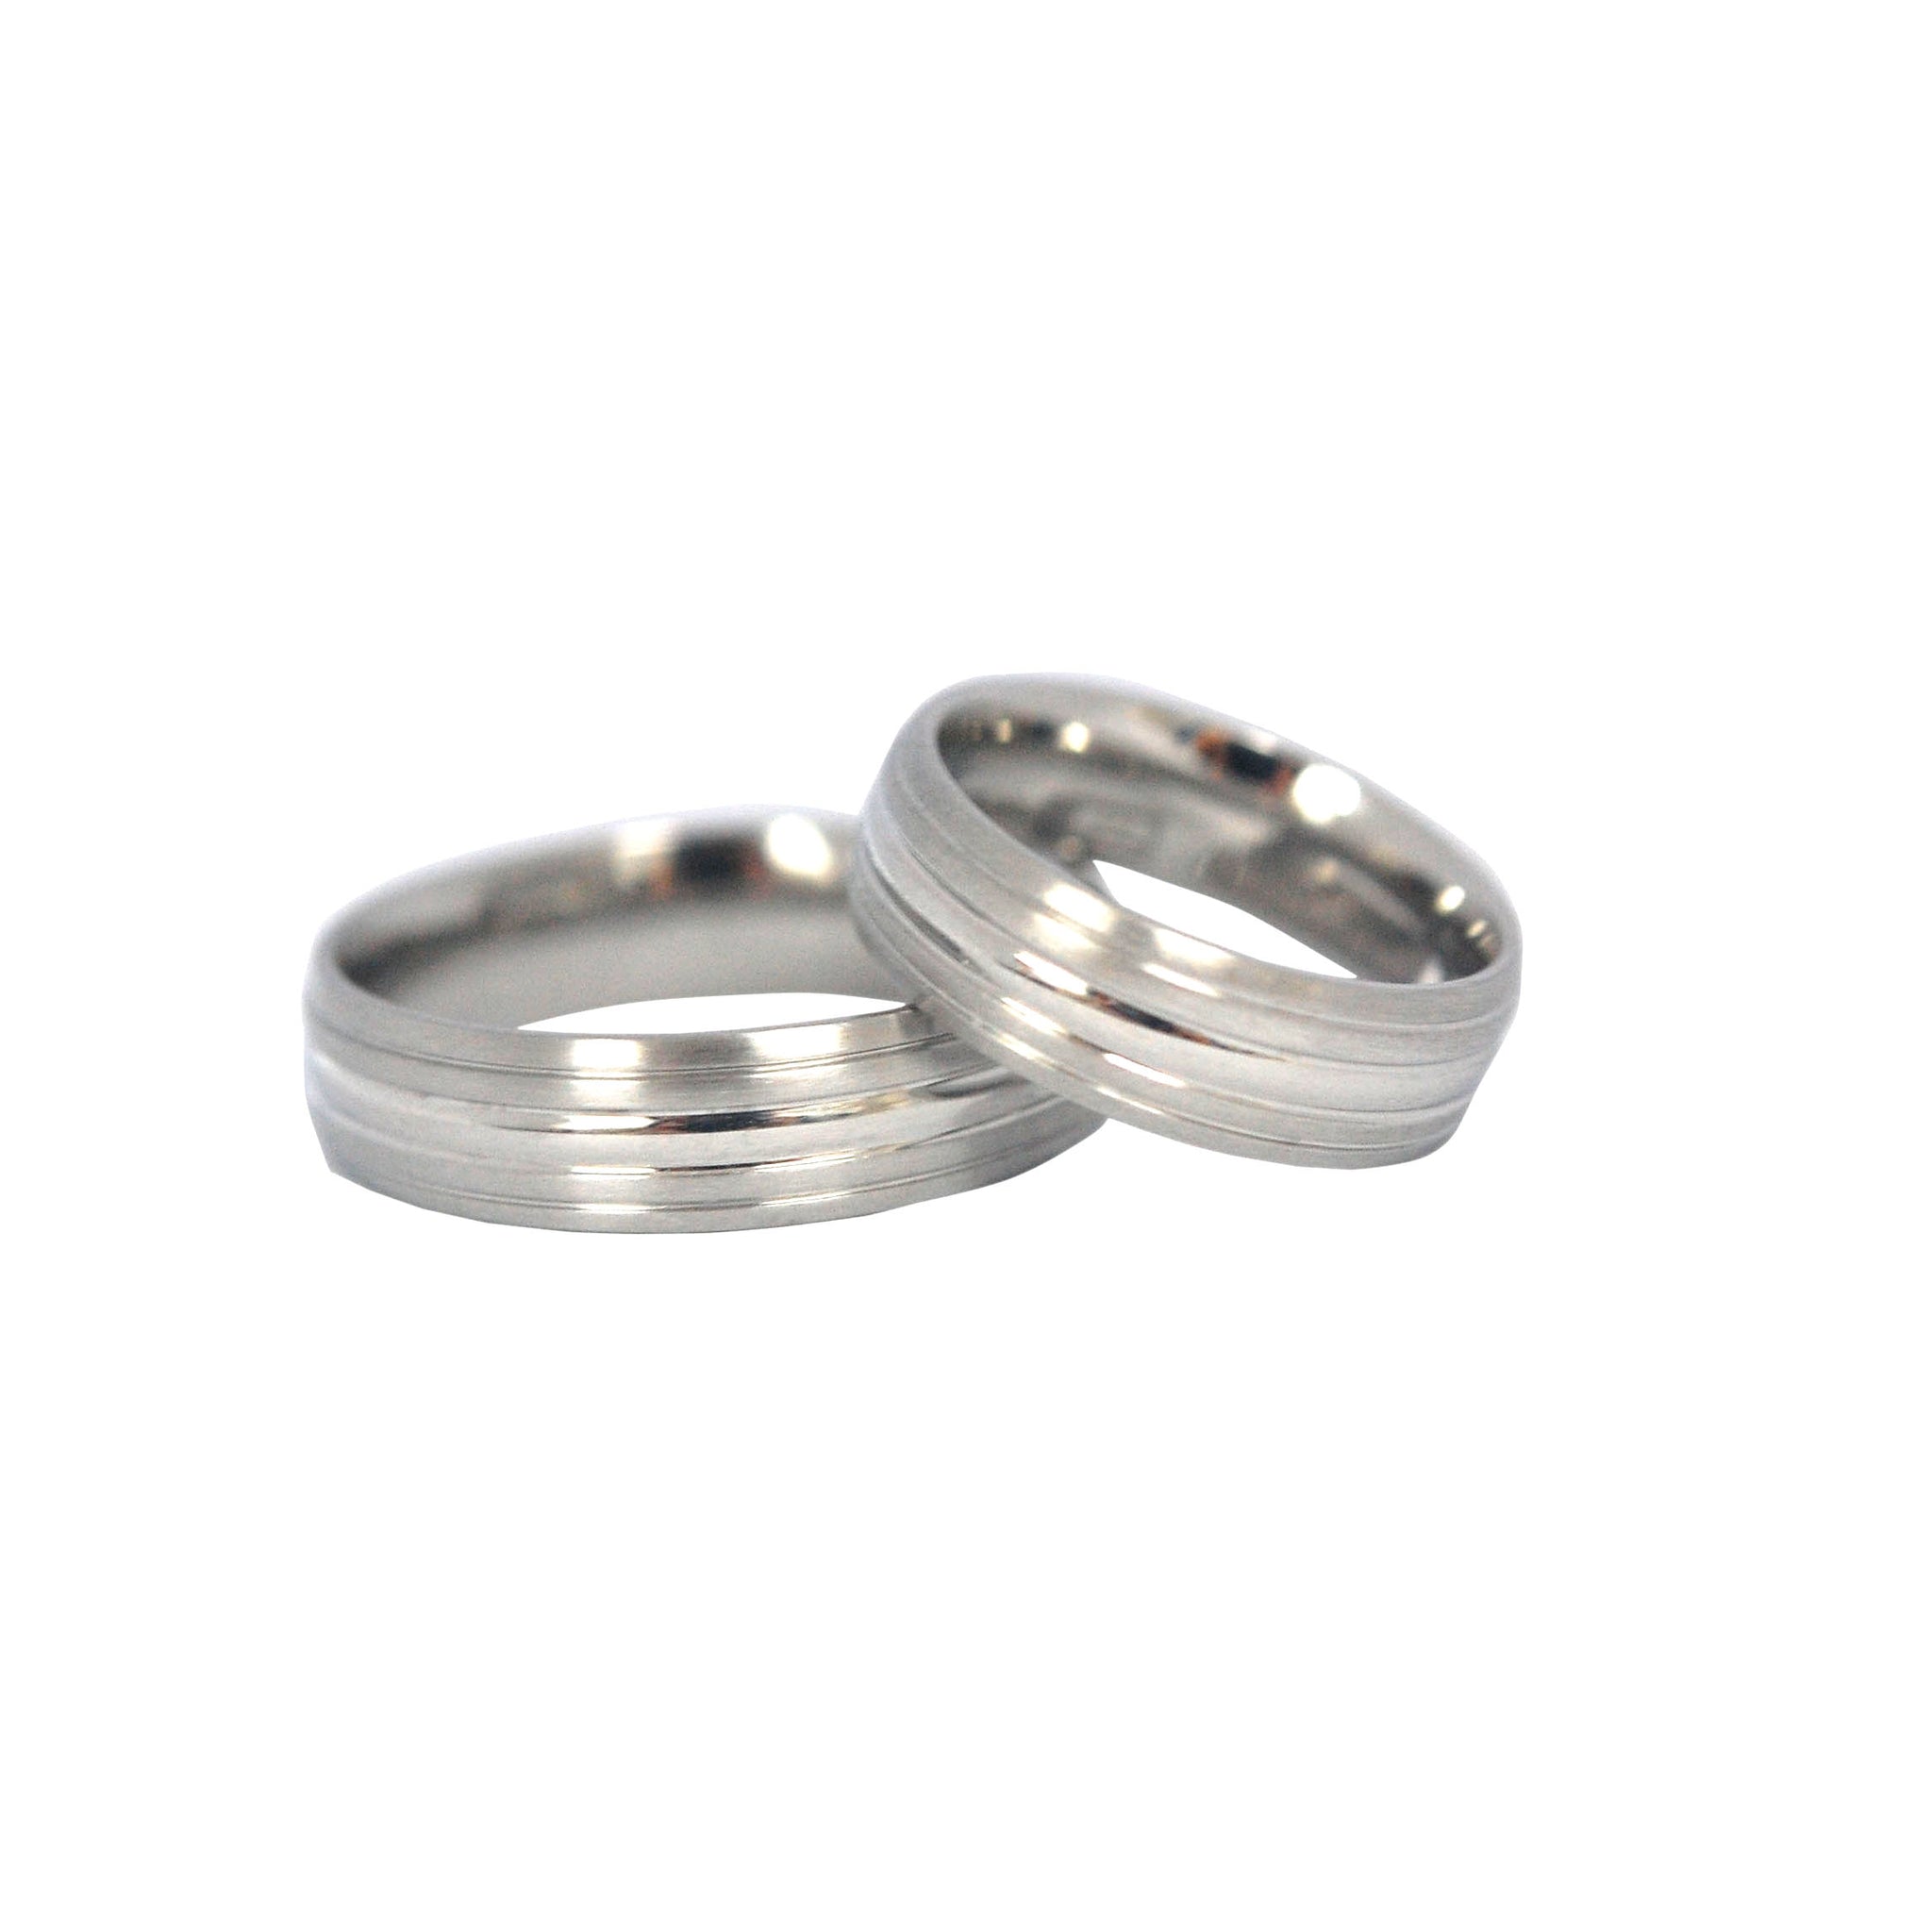 ESR 5872: Rica 5-Lined 6mm Comfort Fit Ring w/ Glossy Center